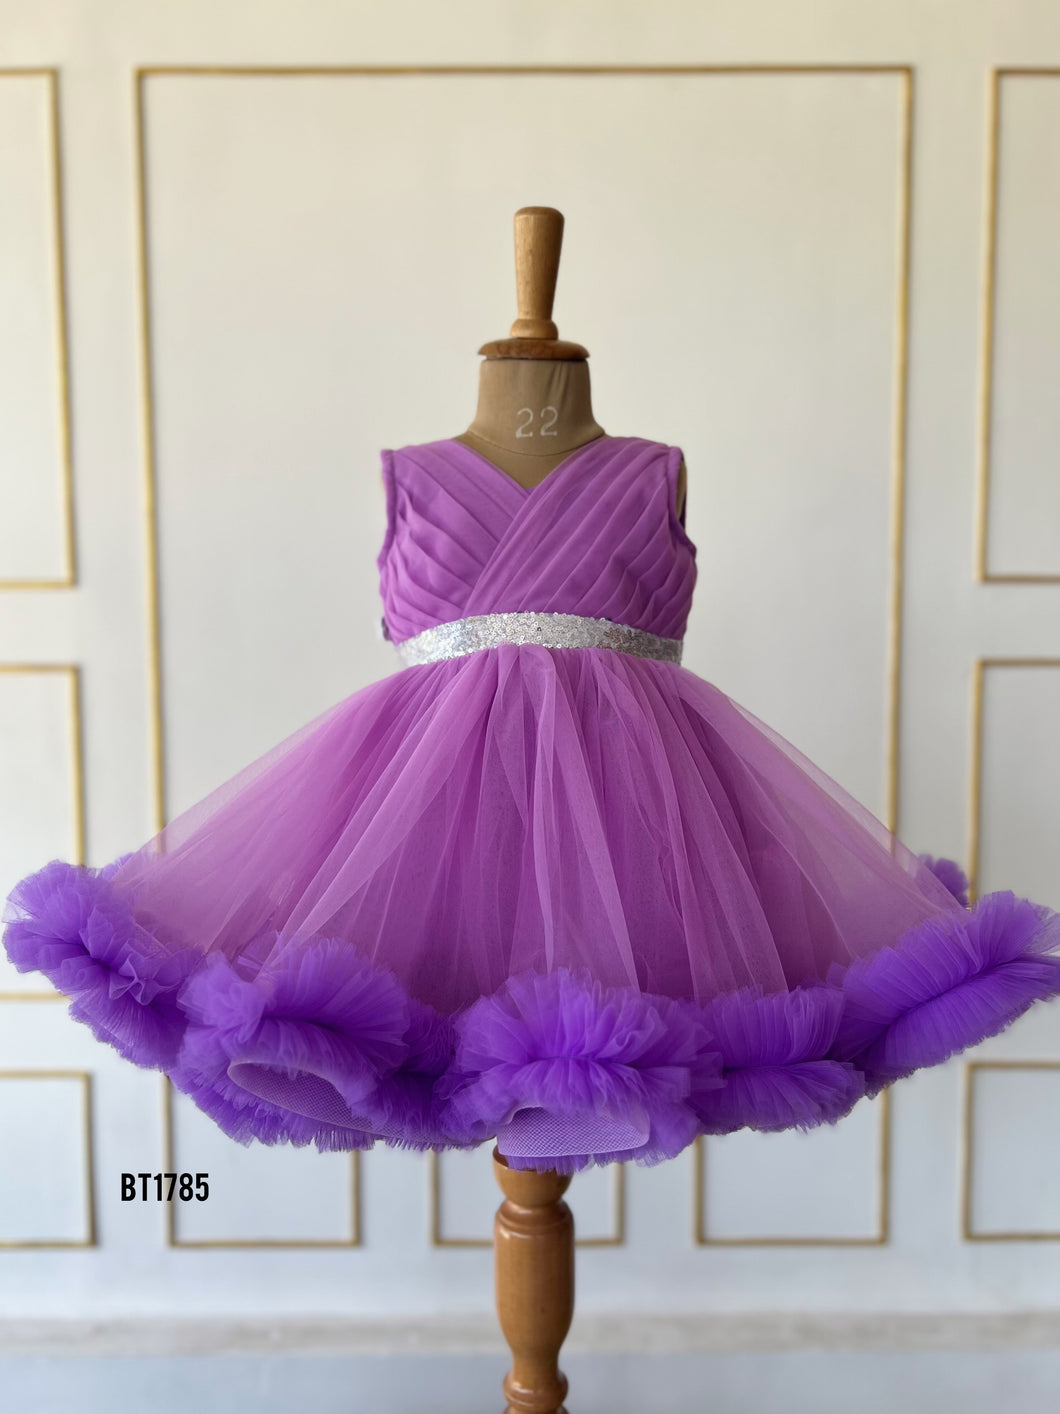 BT1785 Enchanting Violet Princess Dress - Perfect for Special Occasions